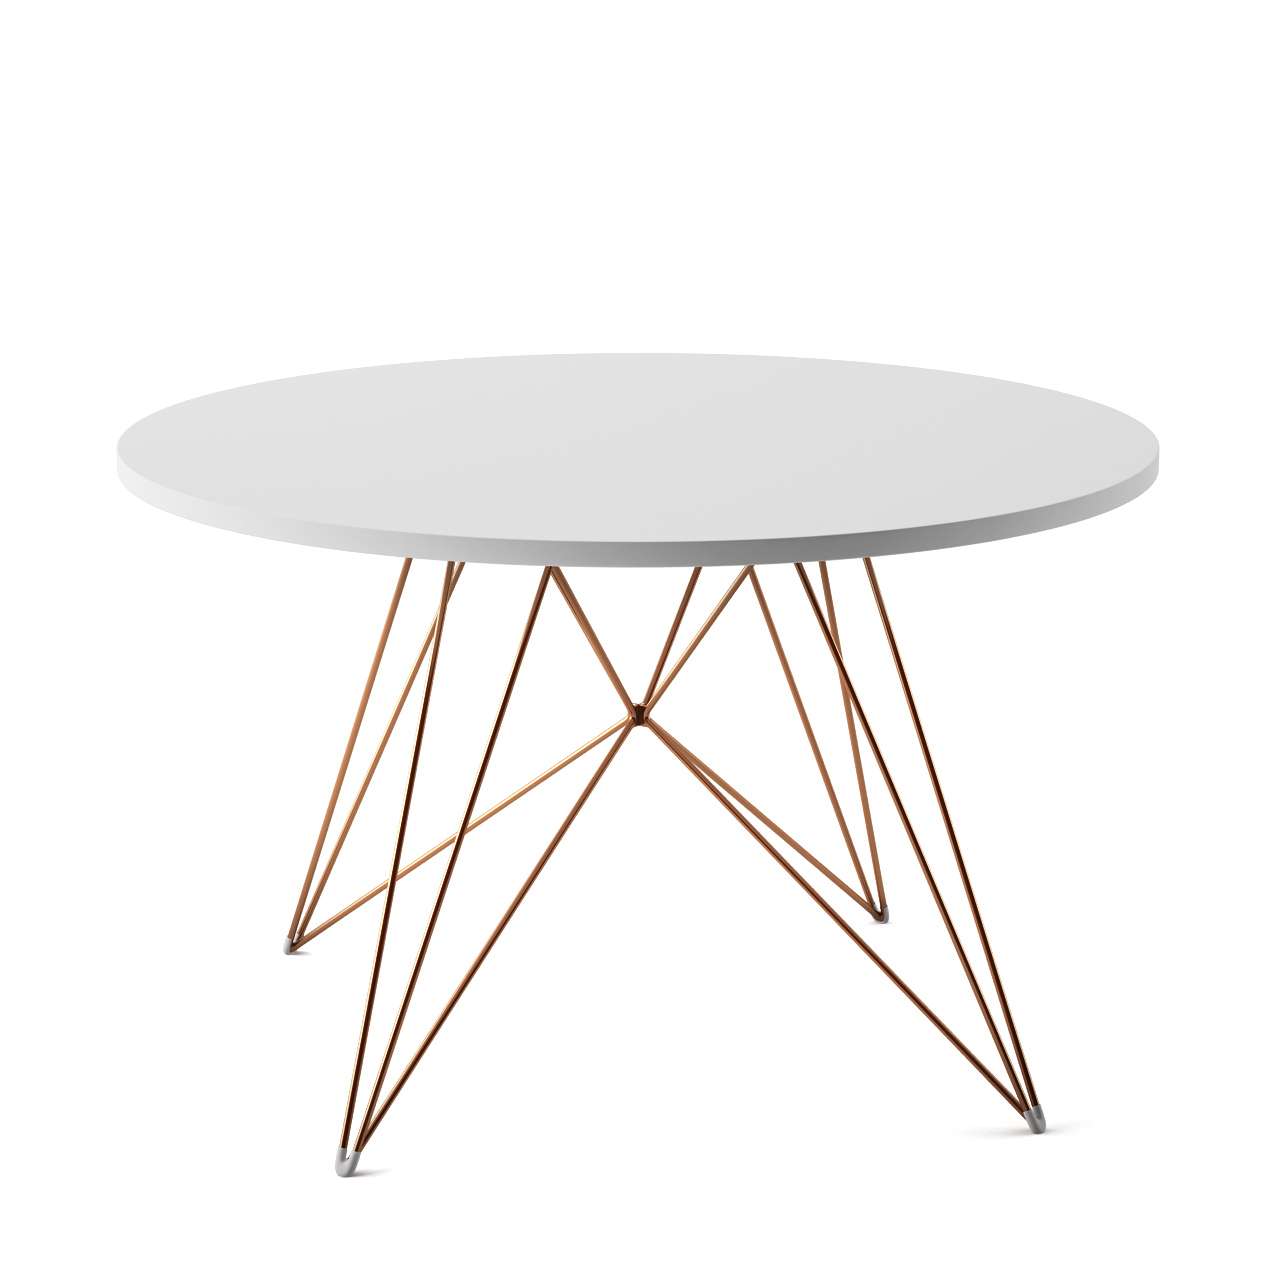 xz3-table-round-by-magis.jpg